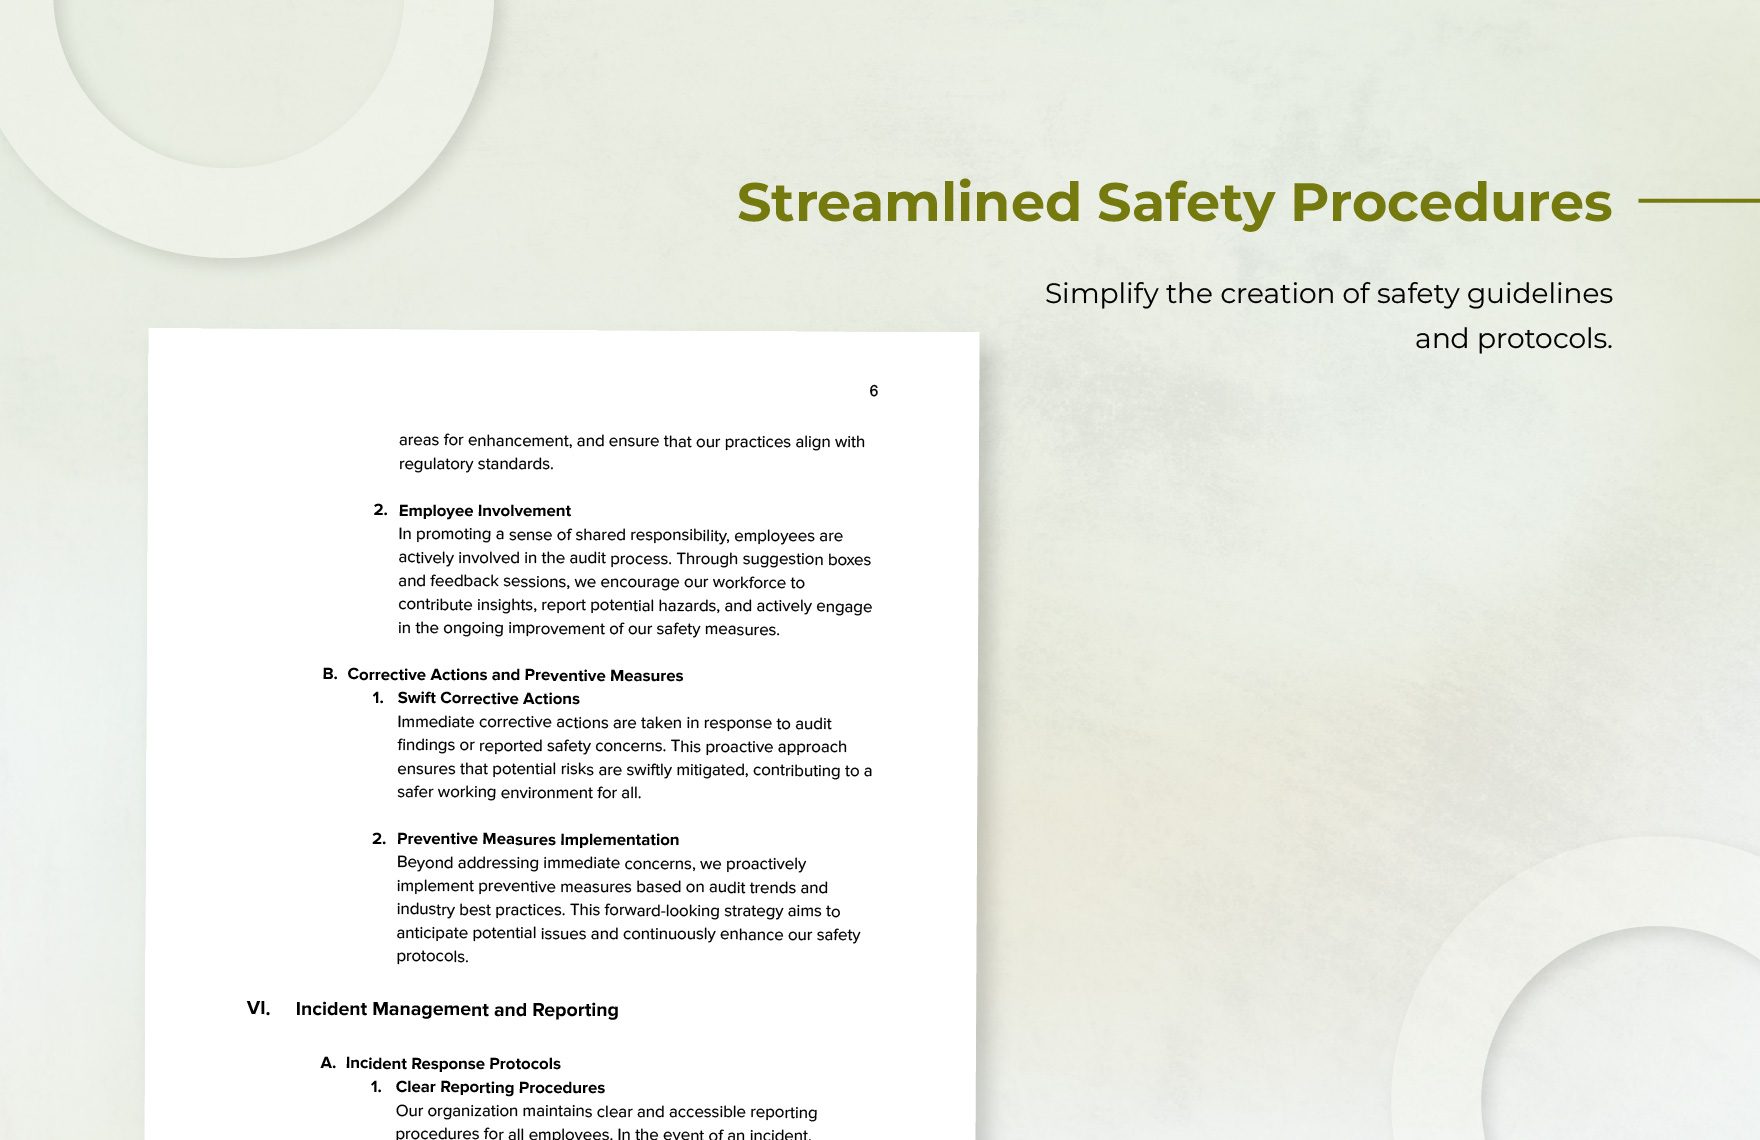 Annual Health & Safety Awareness Report Template